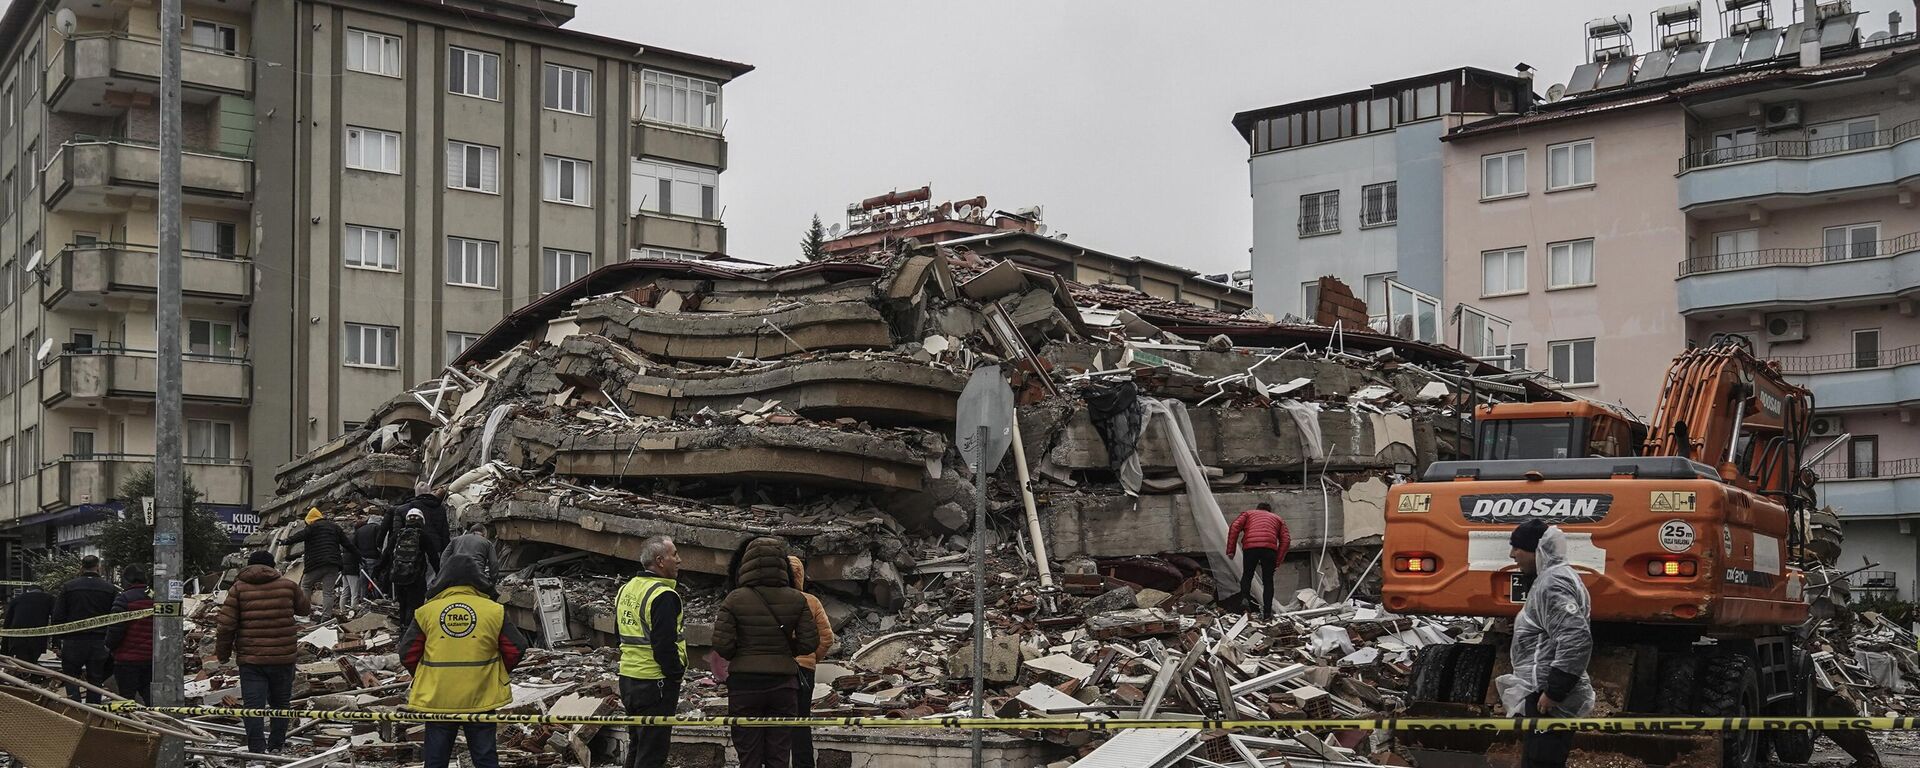 Emergency teams search for people in the rubble of a destroyed building in Gaziantep, Turkey, Monday, Feb. 6, 2023. A powerful quake has knocked down multiple buildings in southeast Turkey and Syria and many casualties are feared. - Sputnik International, 1920, 07.02.2023